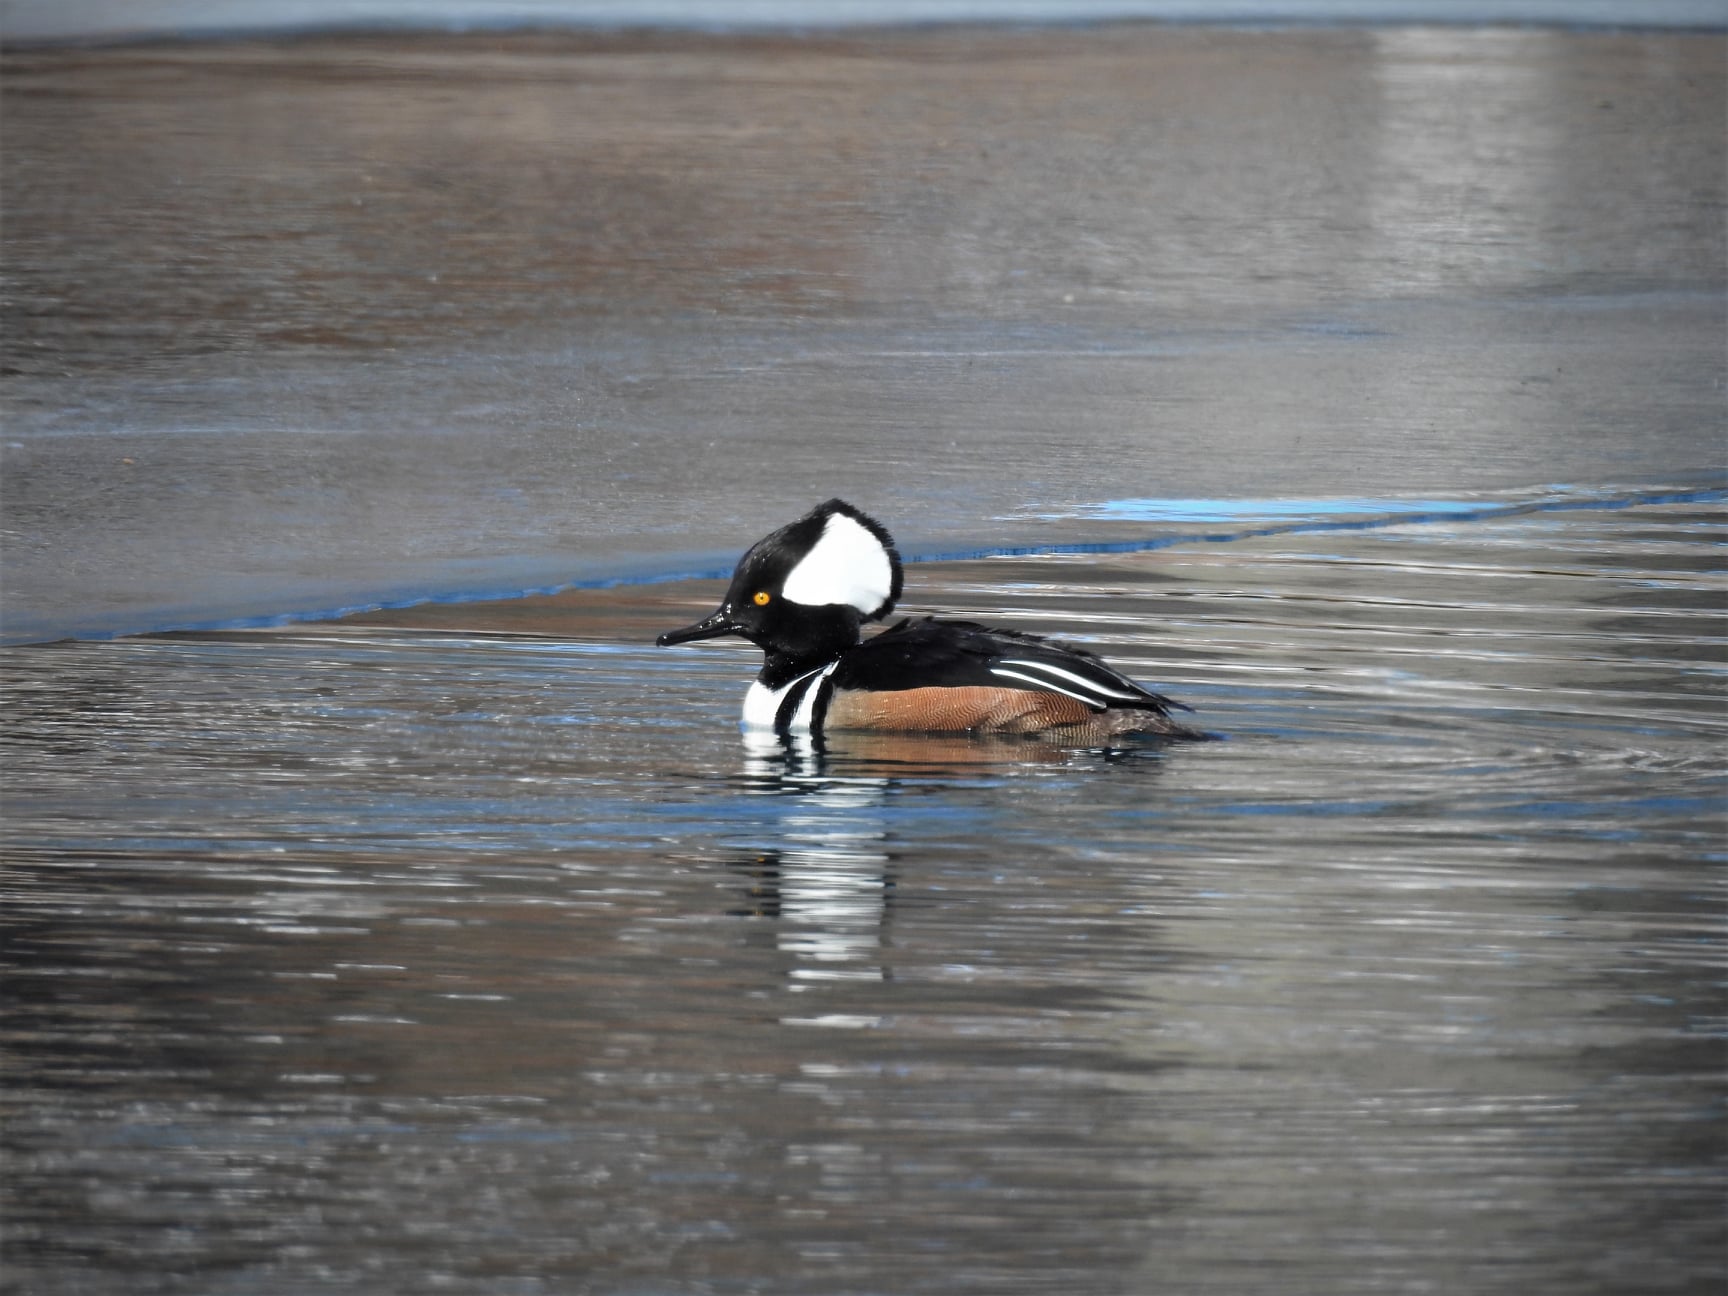 A hooded merganser duck in the water. The duck has a black face with a white crest, and a black, white, and brown body. Photo from the Allerton Park Bird Club Facebook page.